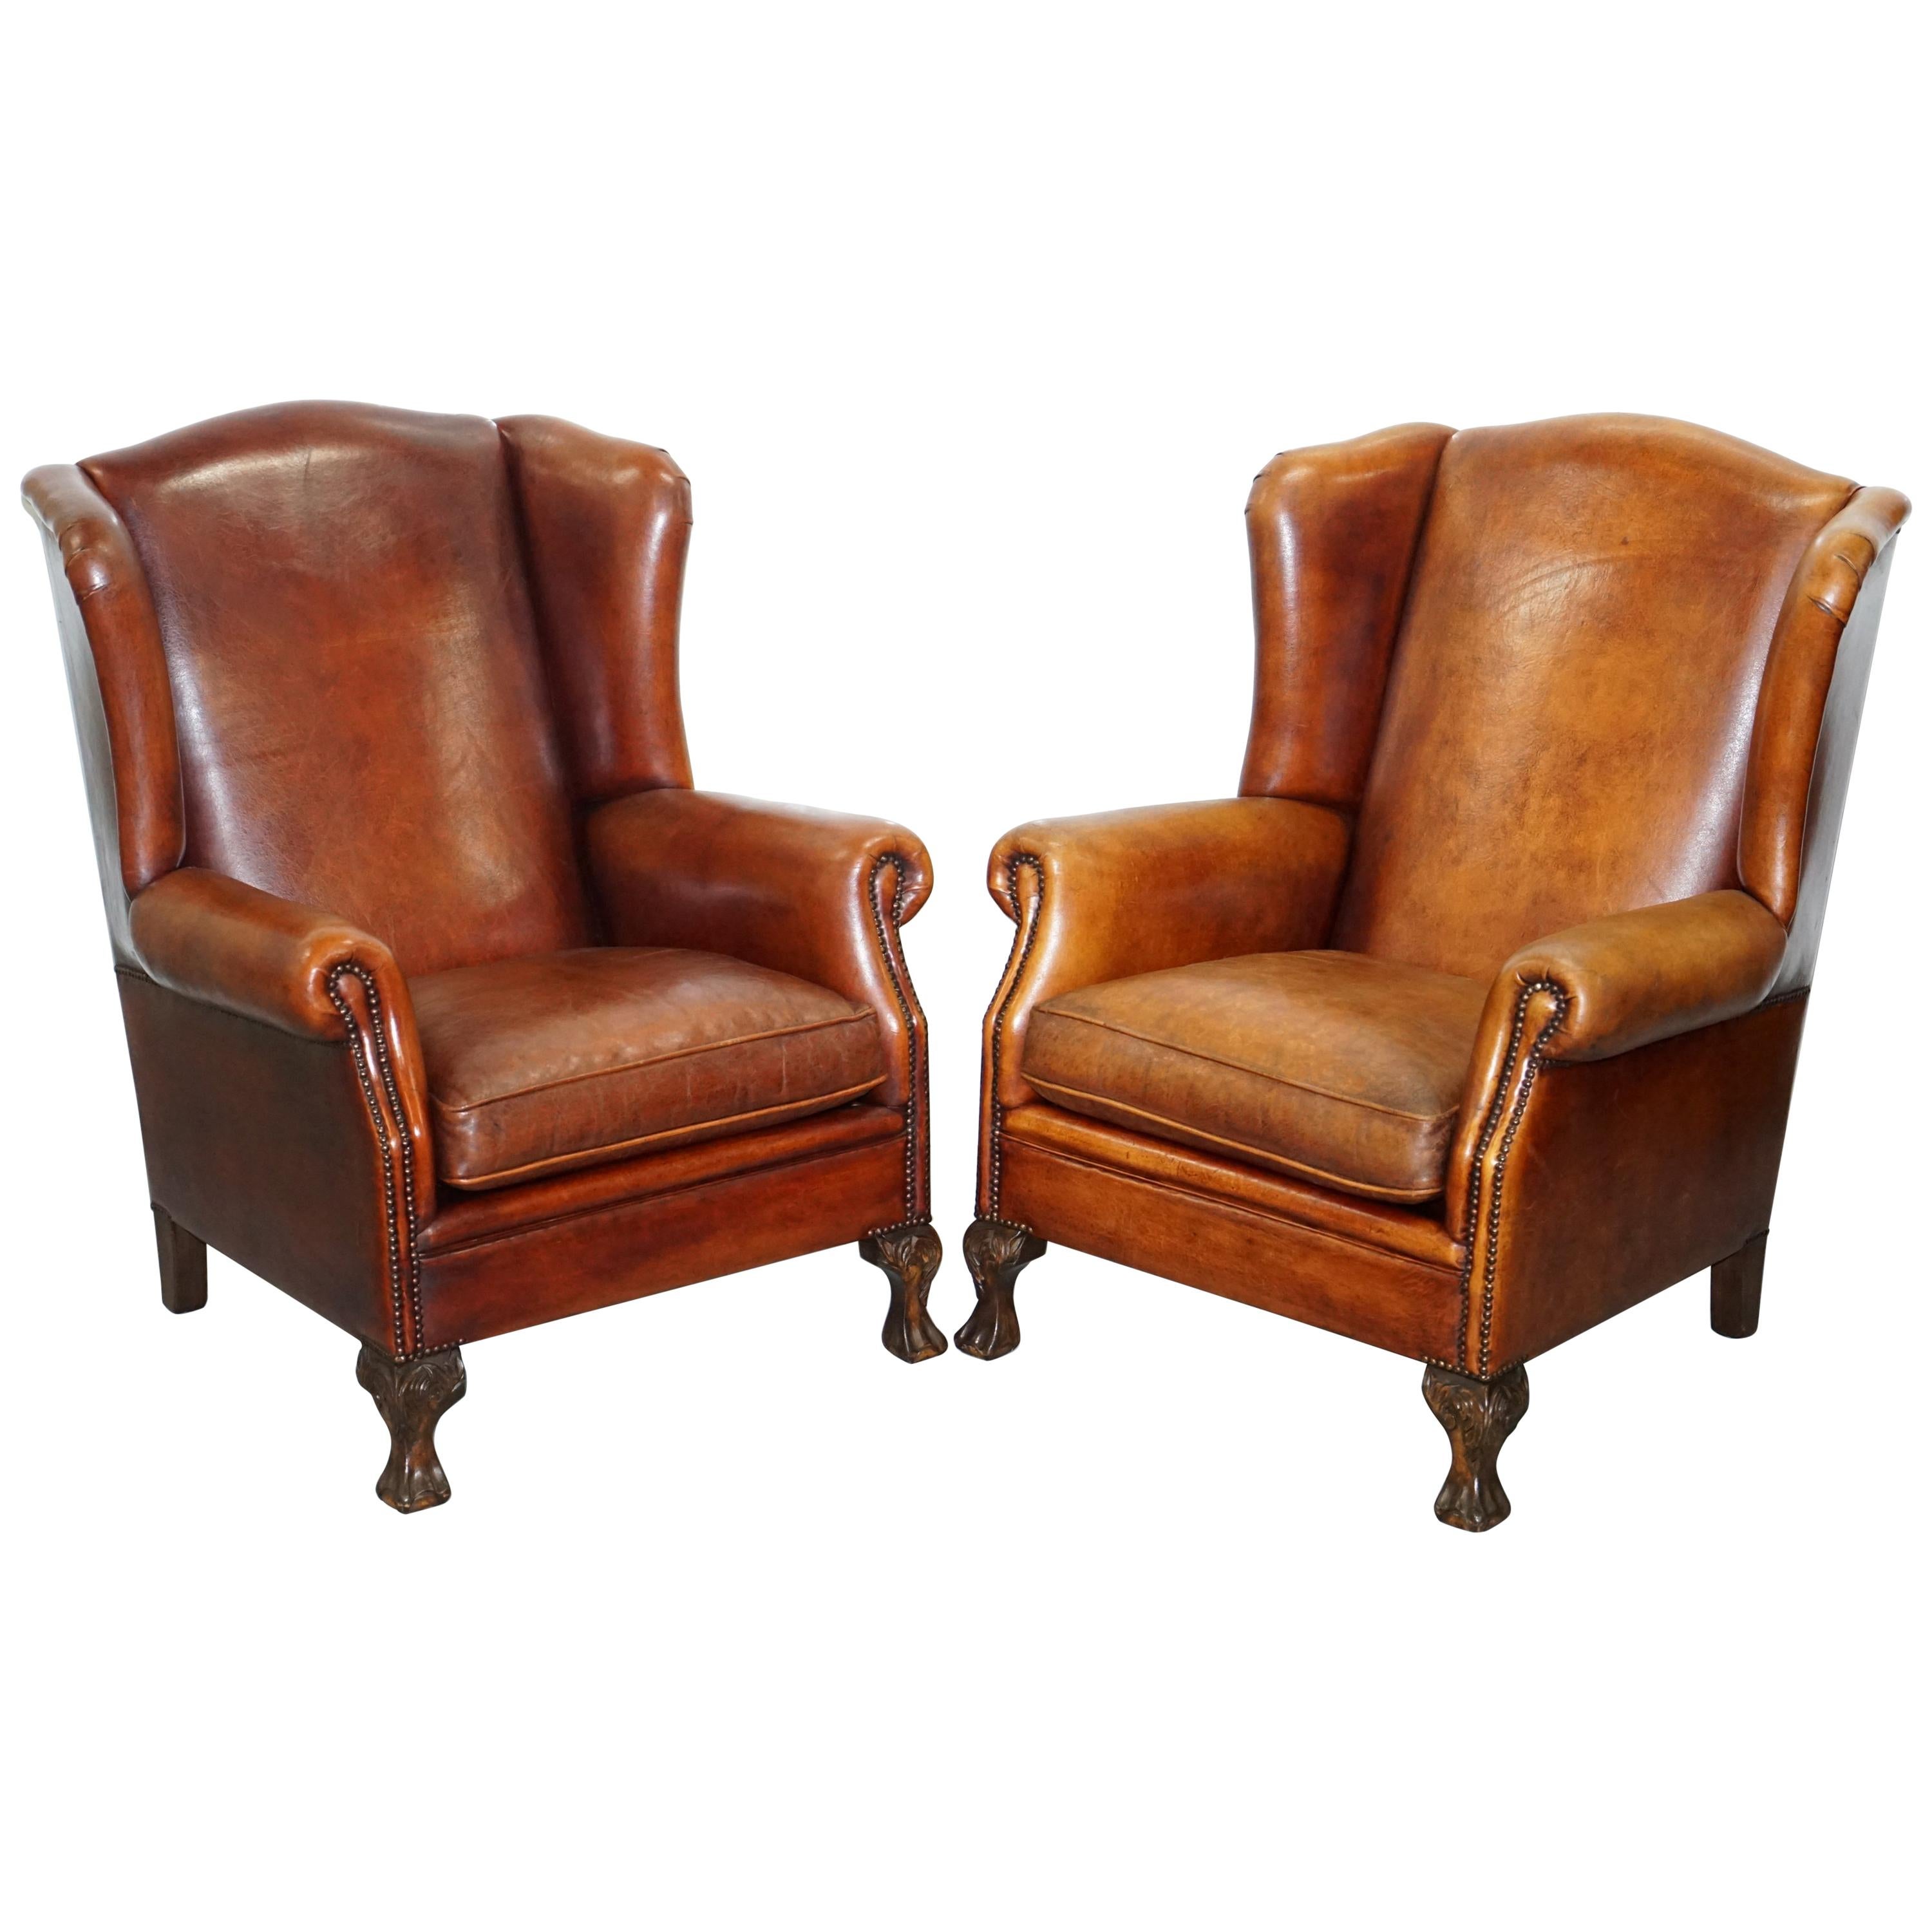 Pair of Vintage Sheepskin Leather Aged Brown Wingback Armchairs Carved Wood Legs